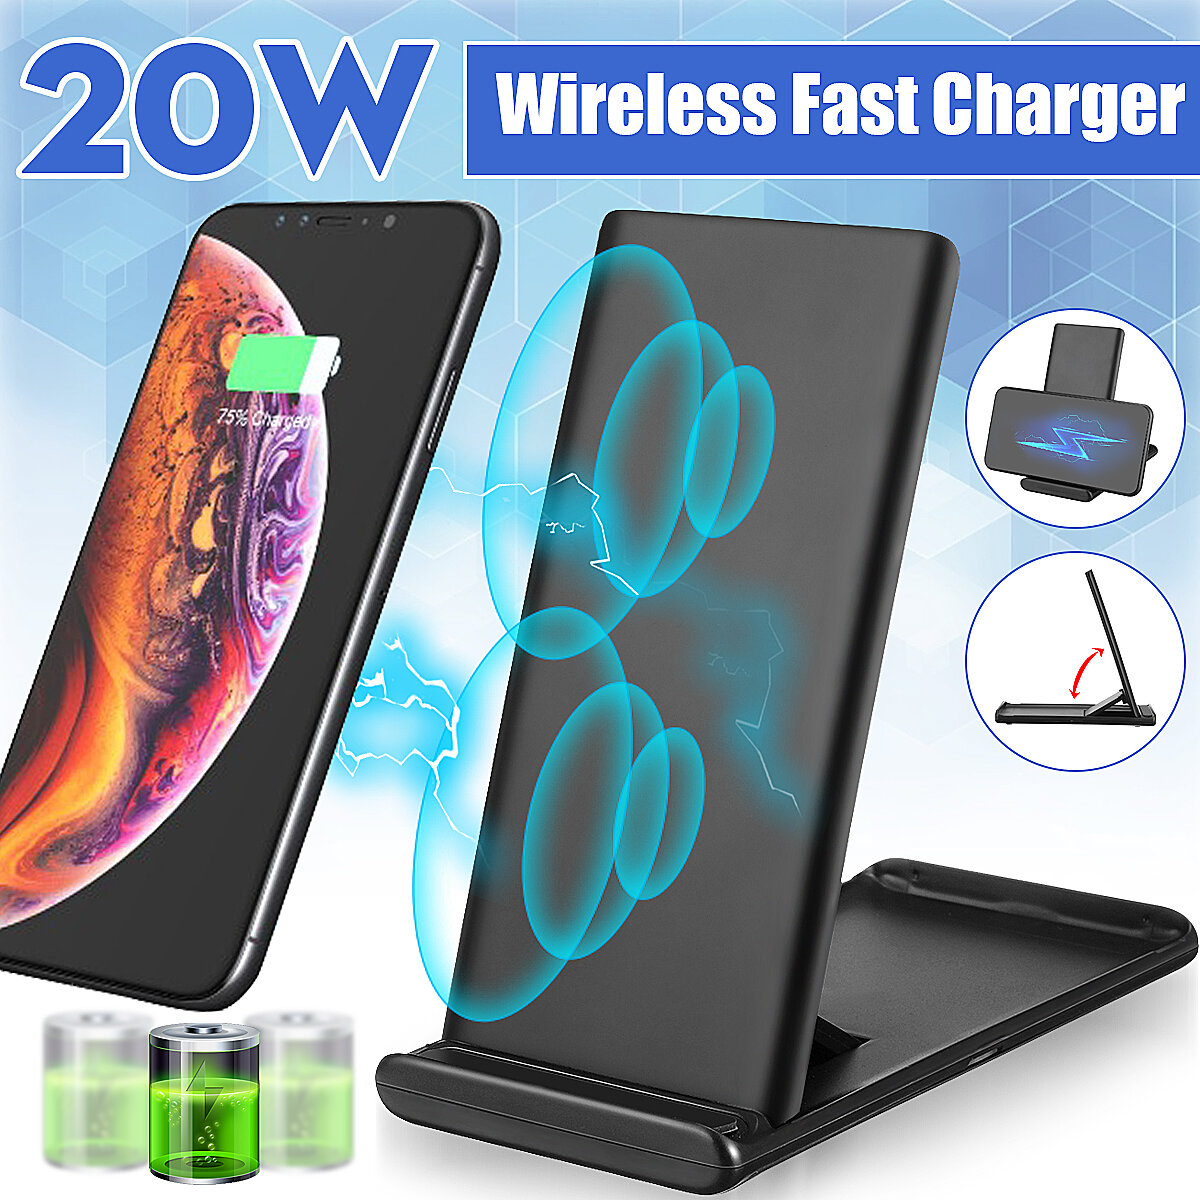 

Bakeey 20W Qi Wireless Fast Charger Charging Dock Station for iPhone 8 X 11 12 Series for Samsung Galaxy Note S20 ultra